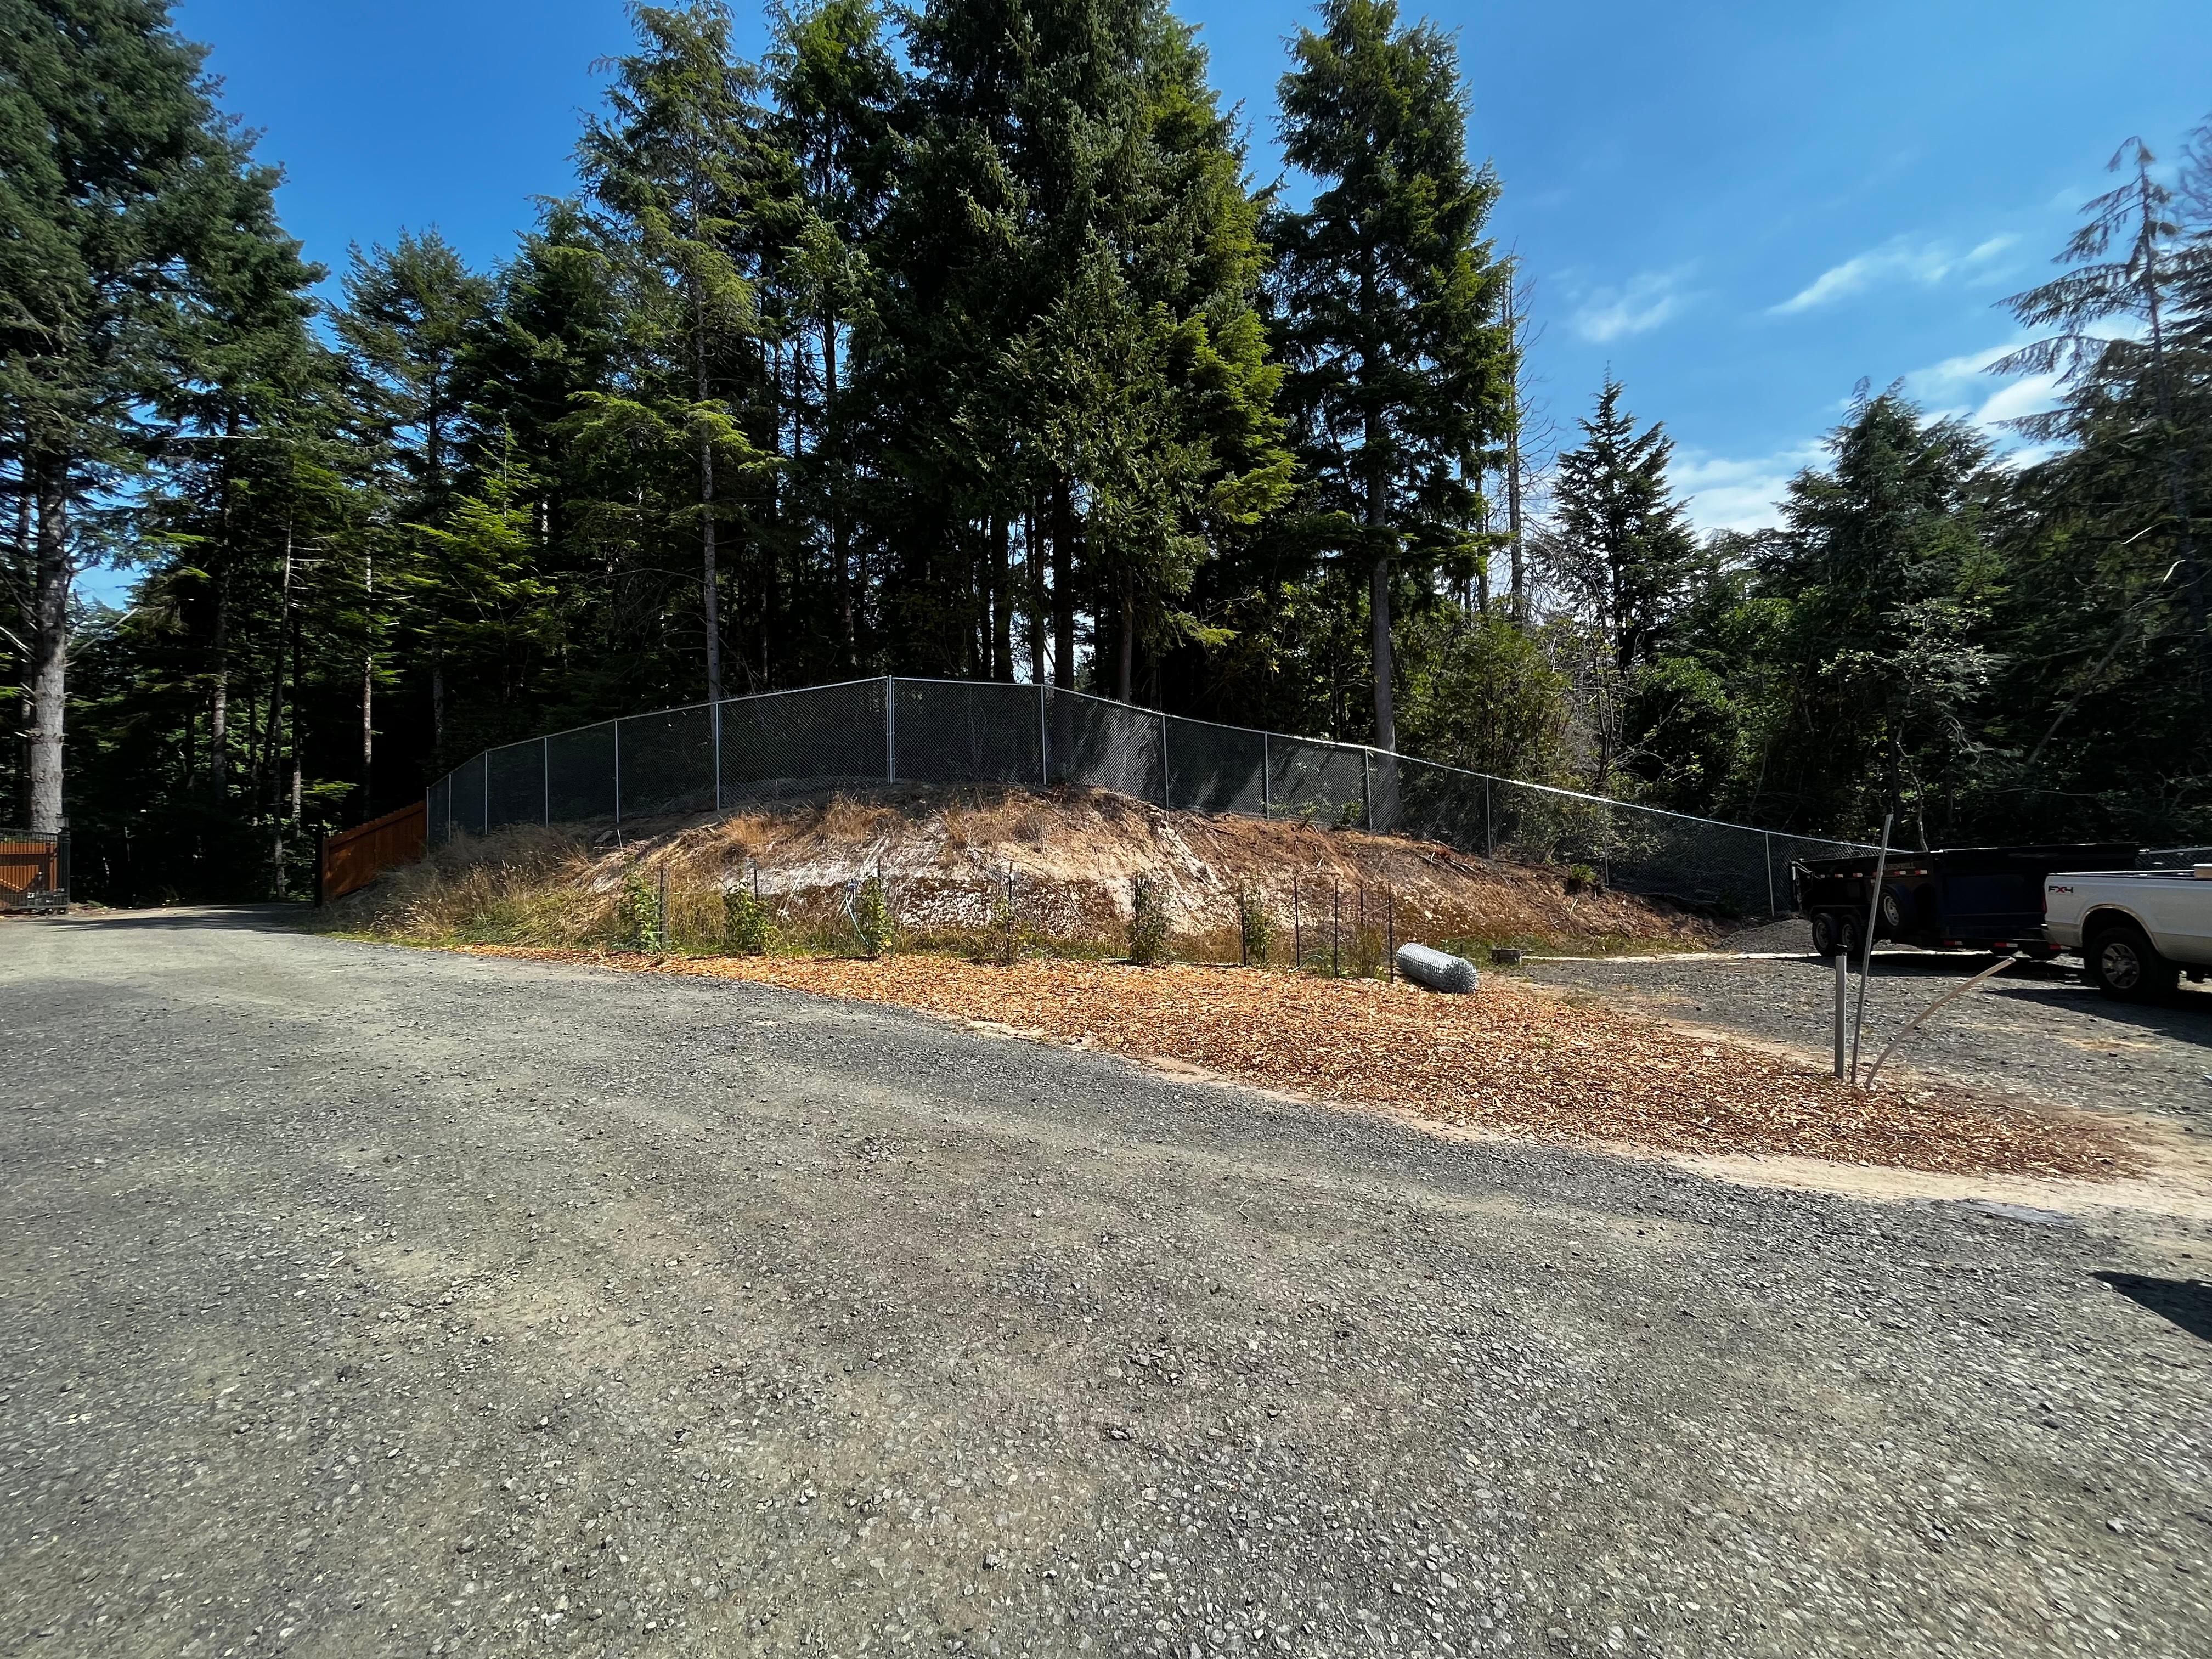 If you're looking for a reliable fencing company in Coos Bay, OR, with years of experience and a commitment to customer satisfaction, contact Cleveland Fencing and Contracting, LLC for all your fencing needs.